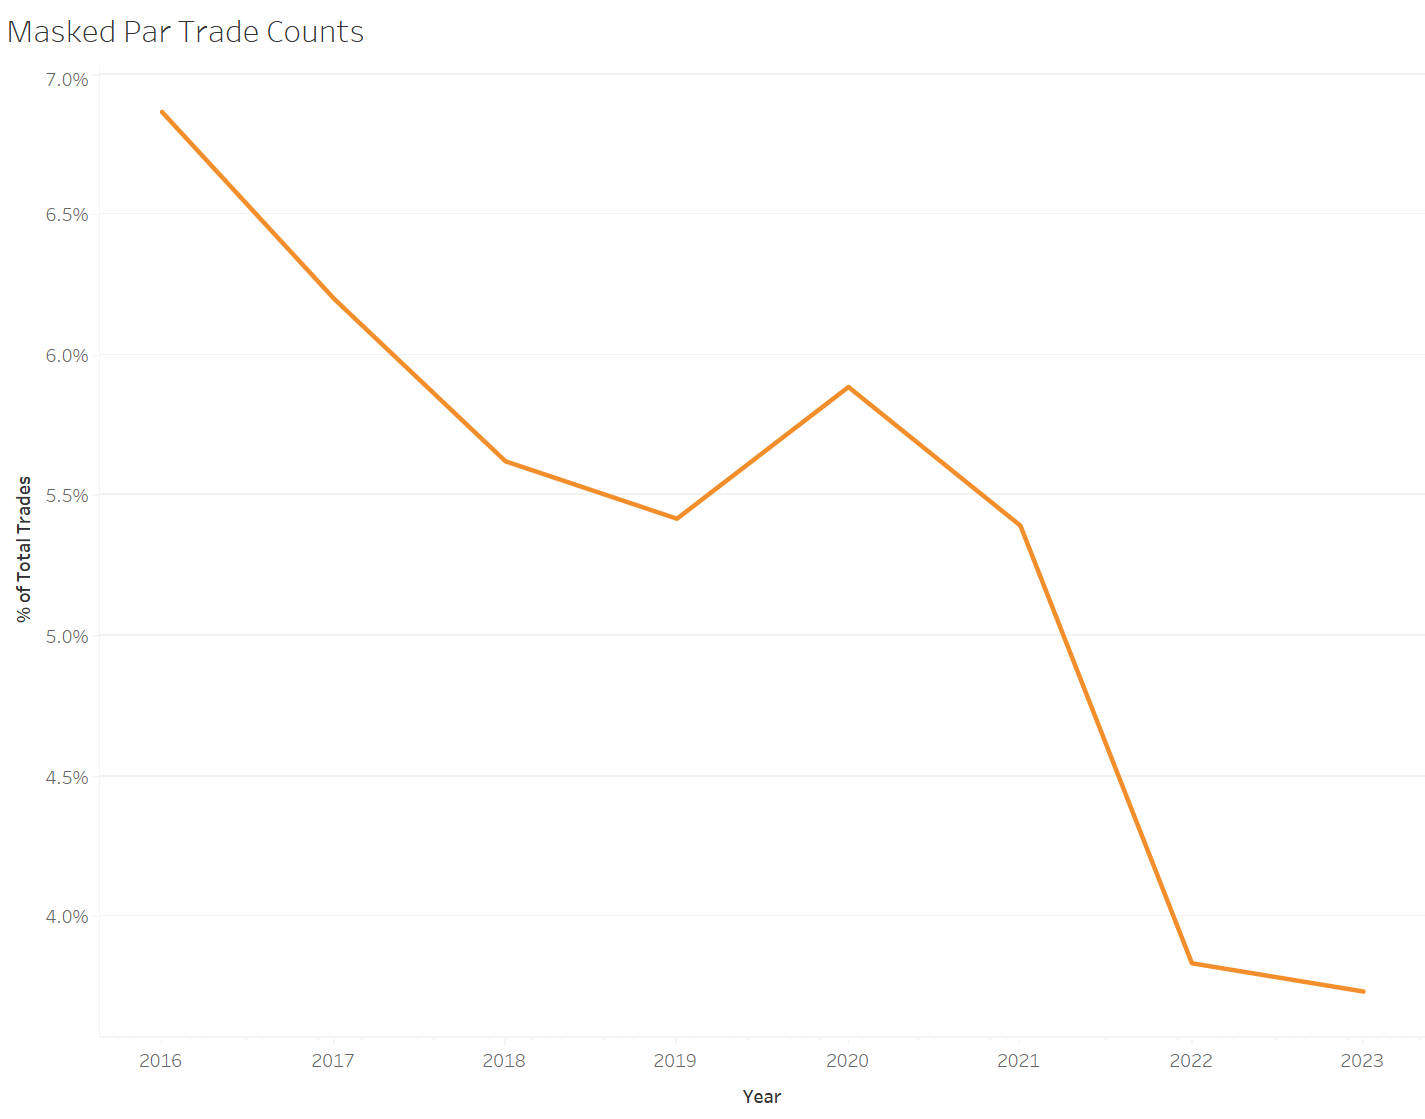 Masked Par Trade Counts showing % of total trades from 2016-2023